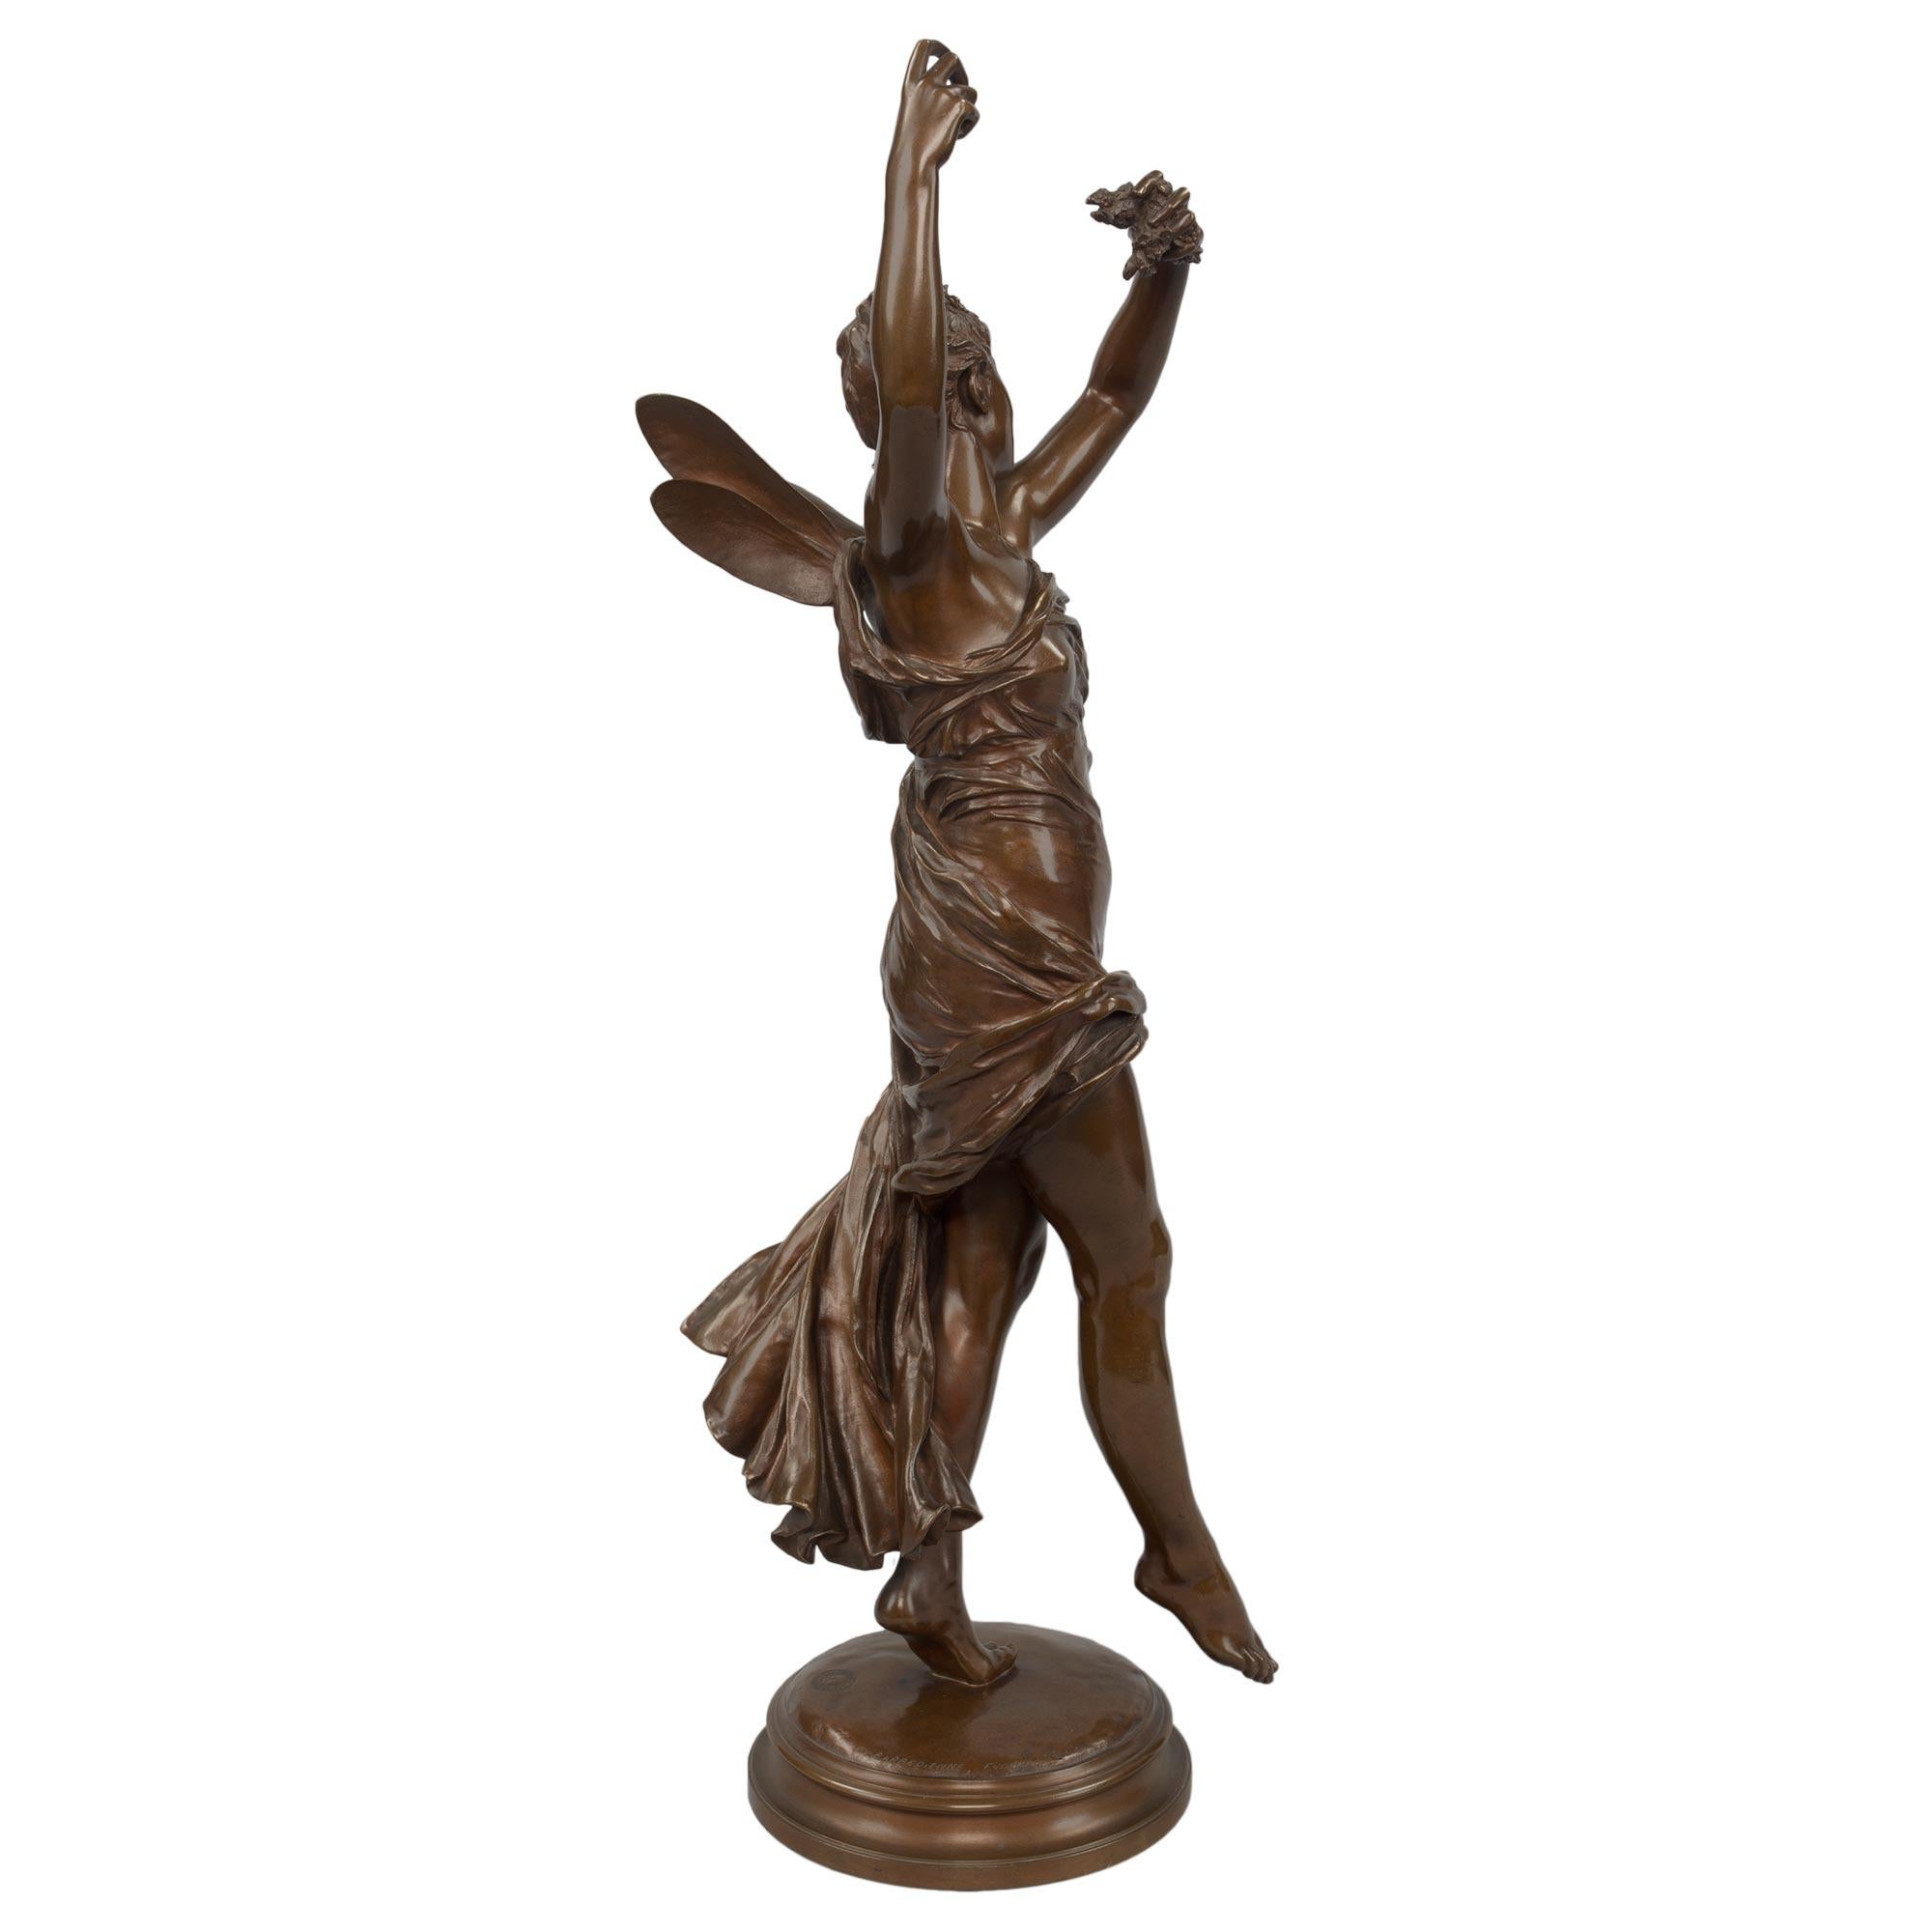 A sensational and very high quality French 19th century patinated bronze of a smiling Psyche signed by E. Delaplanche and cast by the renowned Barbedienne foundry. Psyche is raised by a mottled circular base. She is on her toes with one foot raised